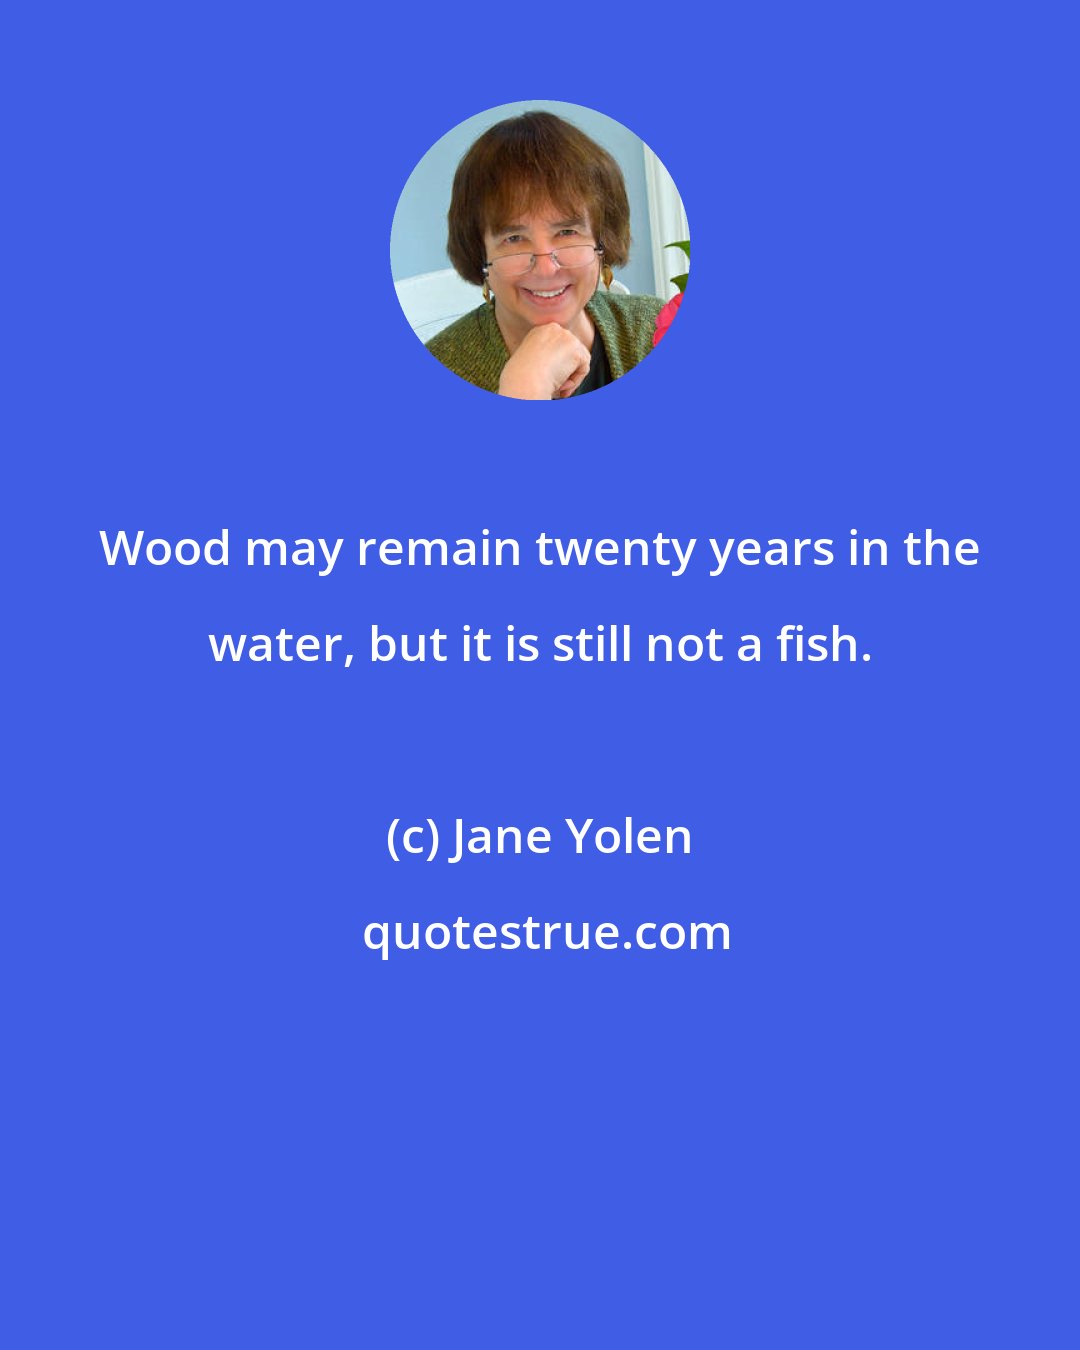 Jane Yolen: Wood may remain twenty years in the water, but it is still not a fish.